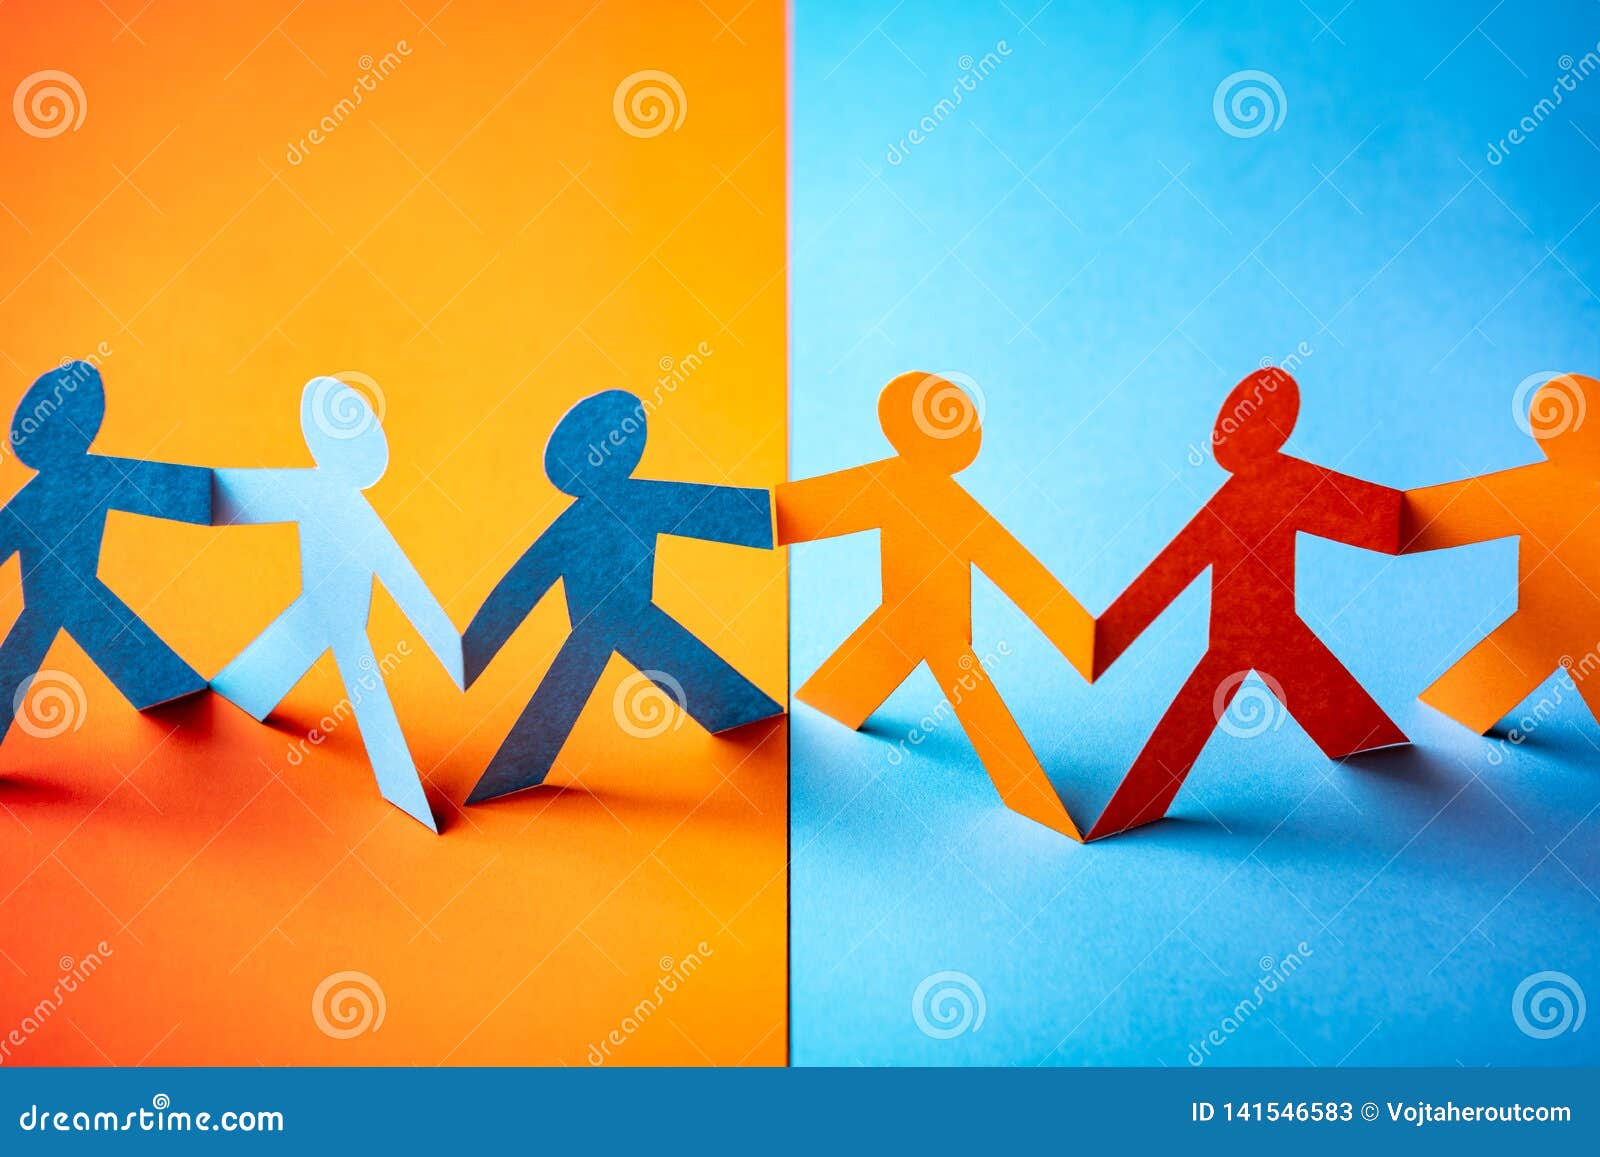 paper cut concept - multicultural cooperation of the two groups